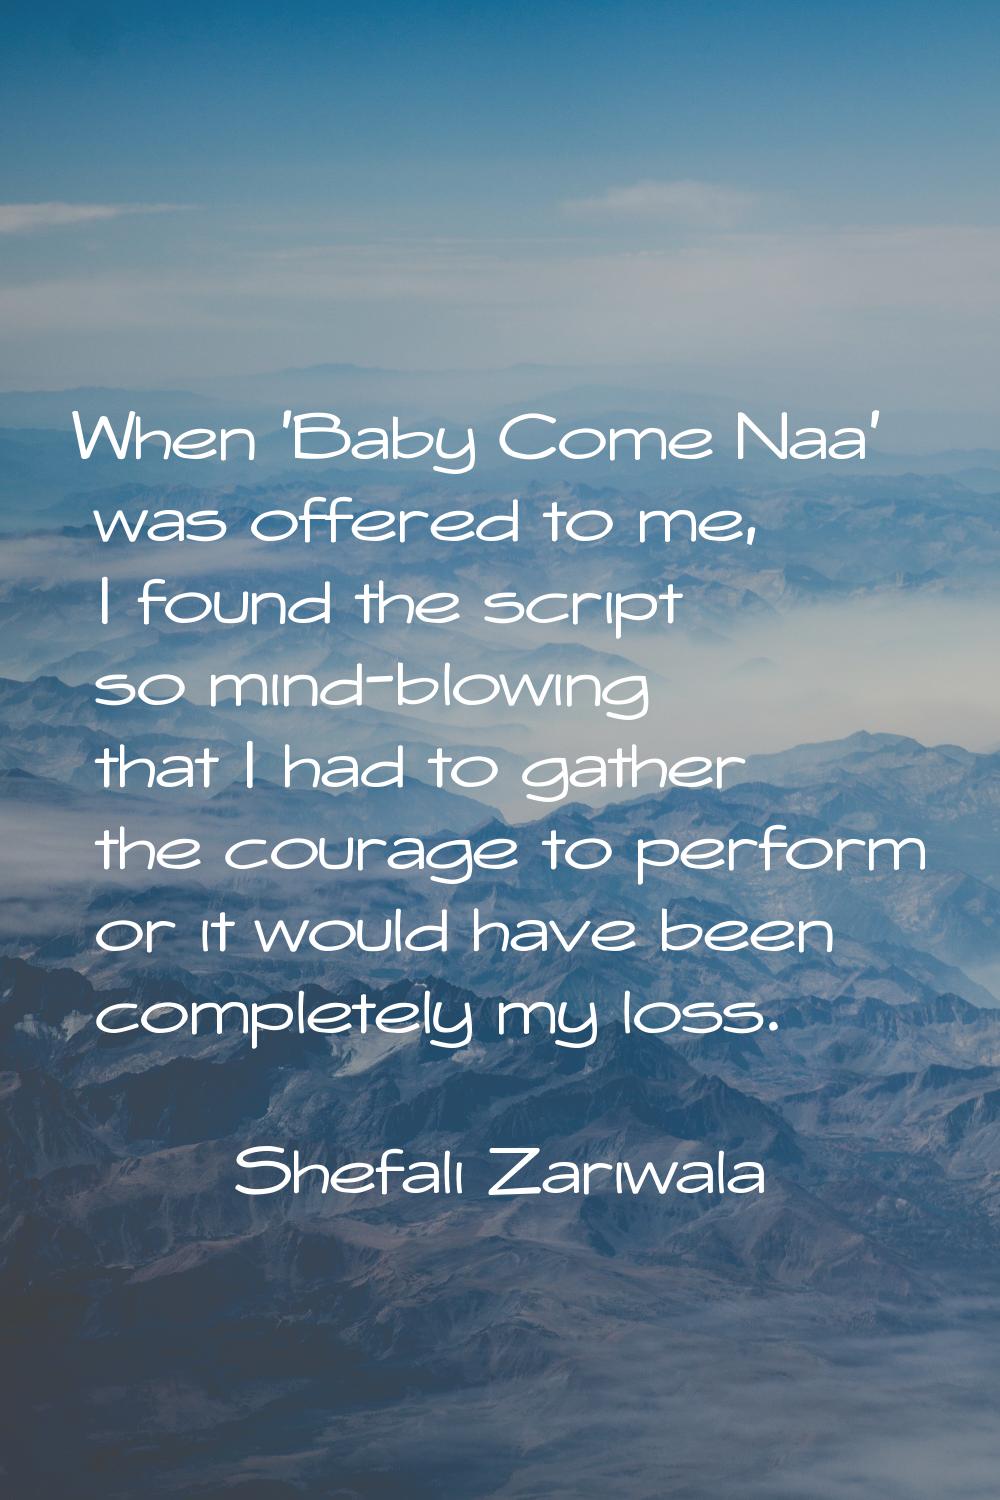 When 'Baby Come Naa' was offered to me, I found the script so mind-blowing that I had to gather the